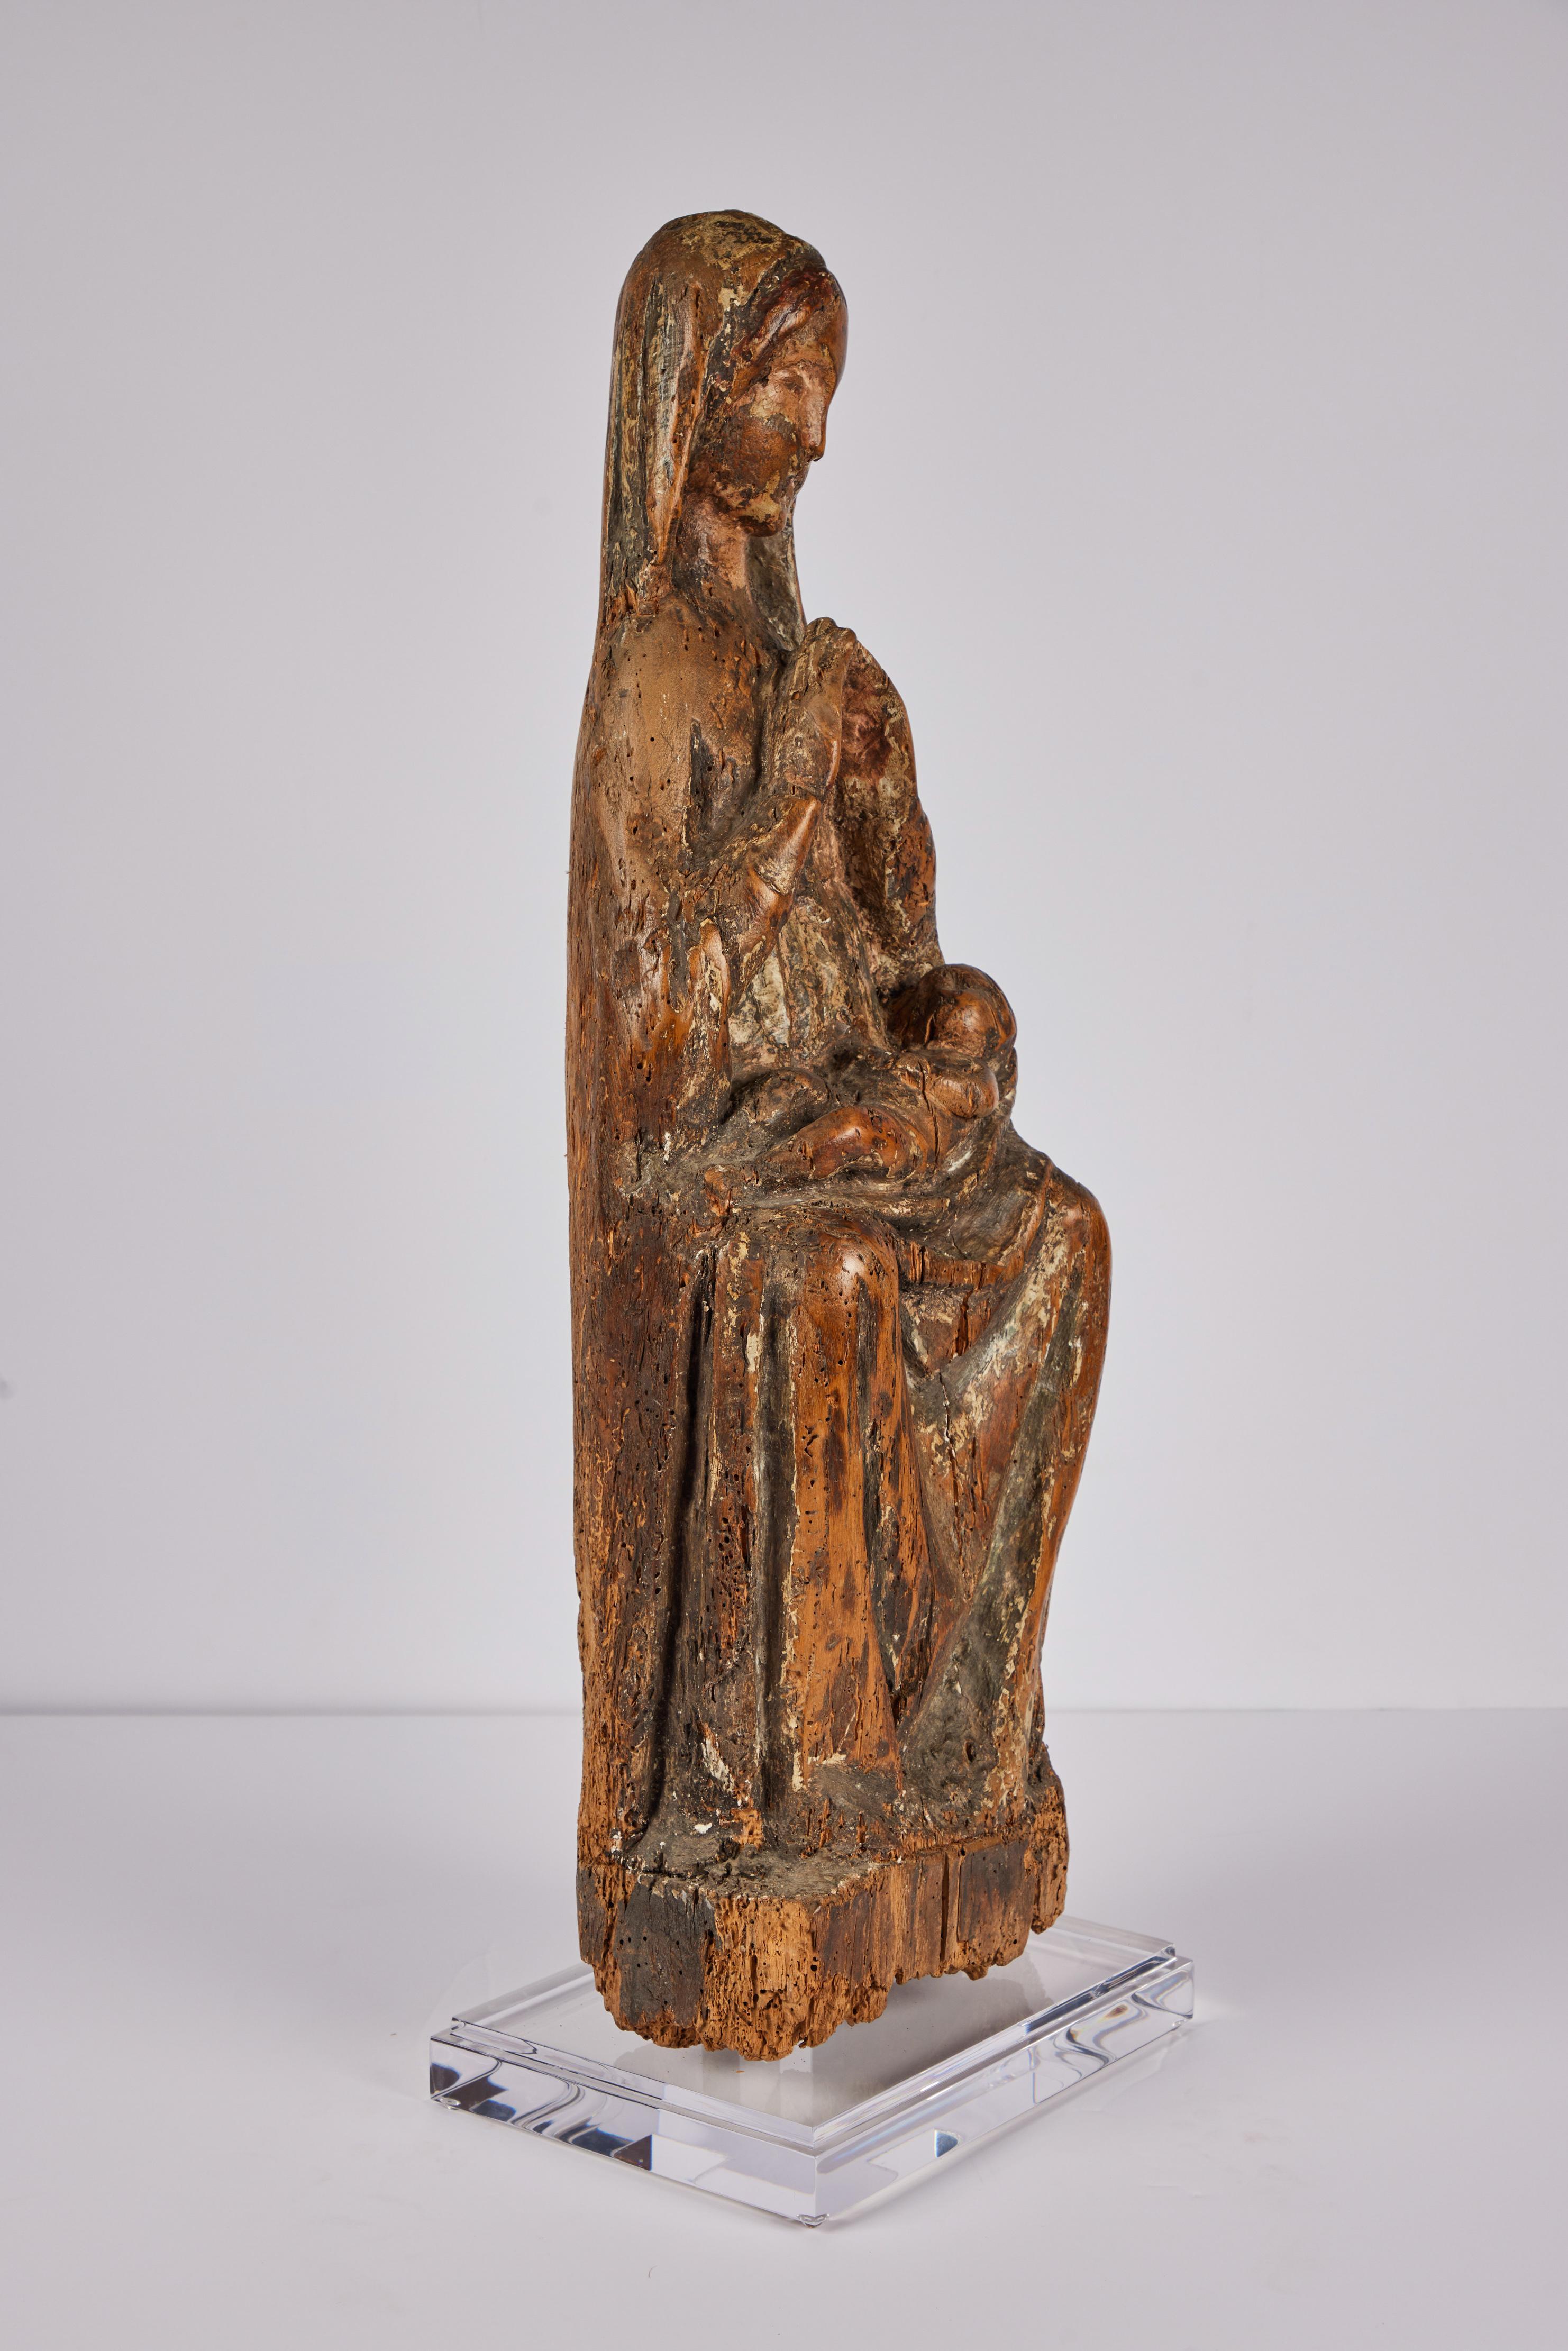 Early Renaissance Wood Sculpture - Brown Figurative Sculpture by Unknown